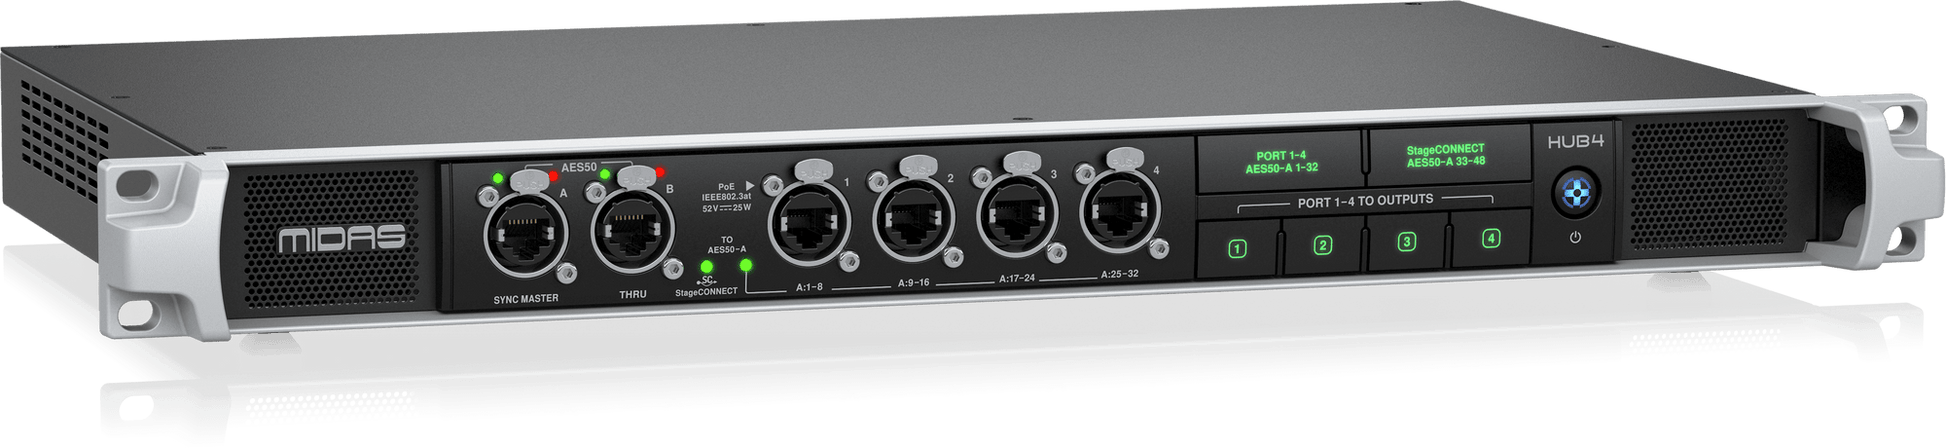 Midas HUB4 Monitor System Hub with 4 PoE Ports for Personal Mixers